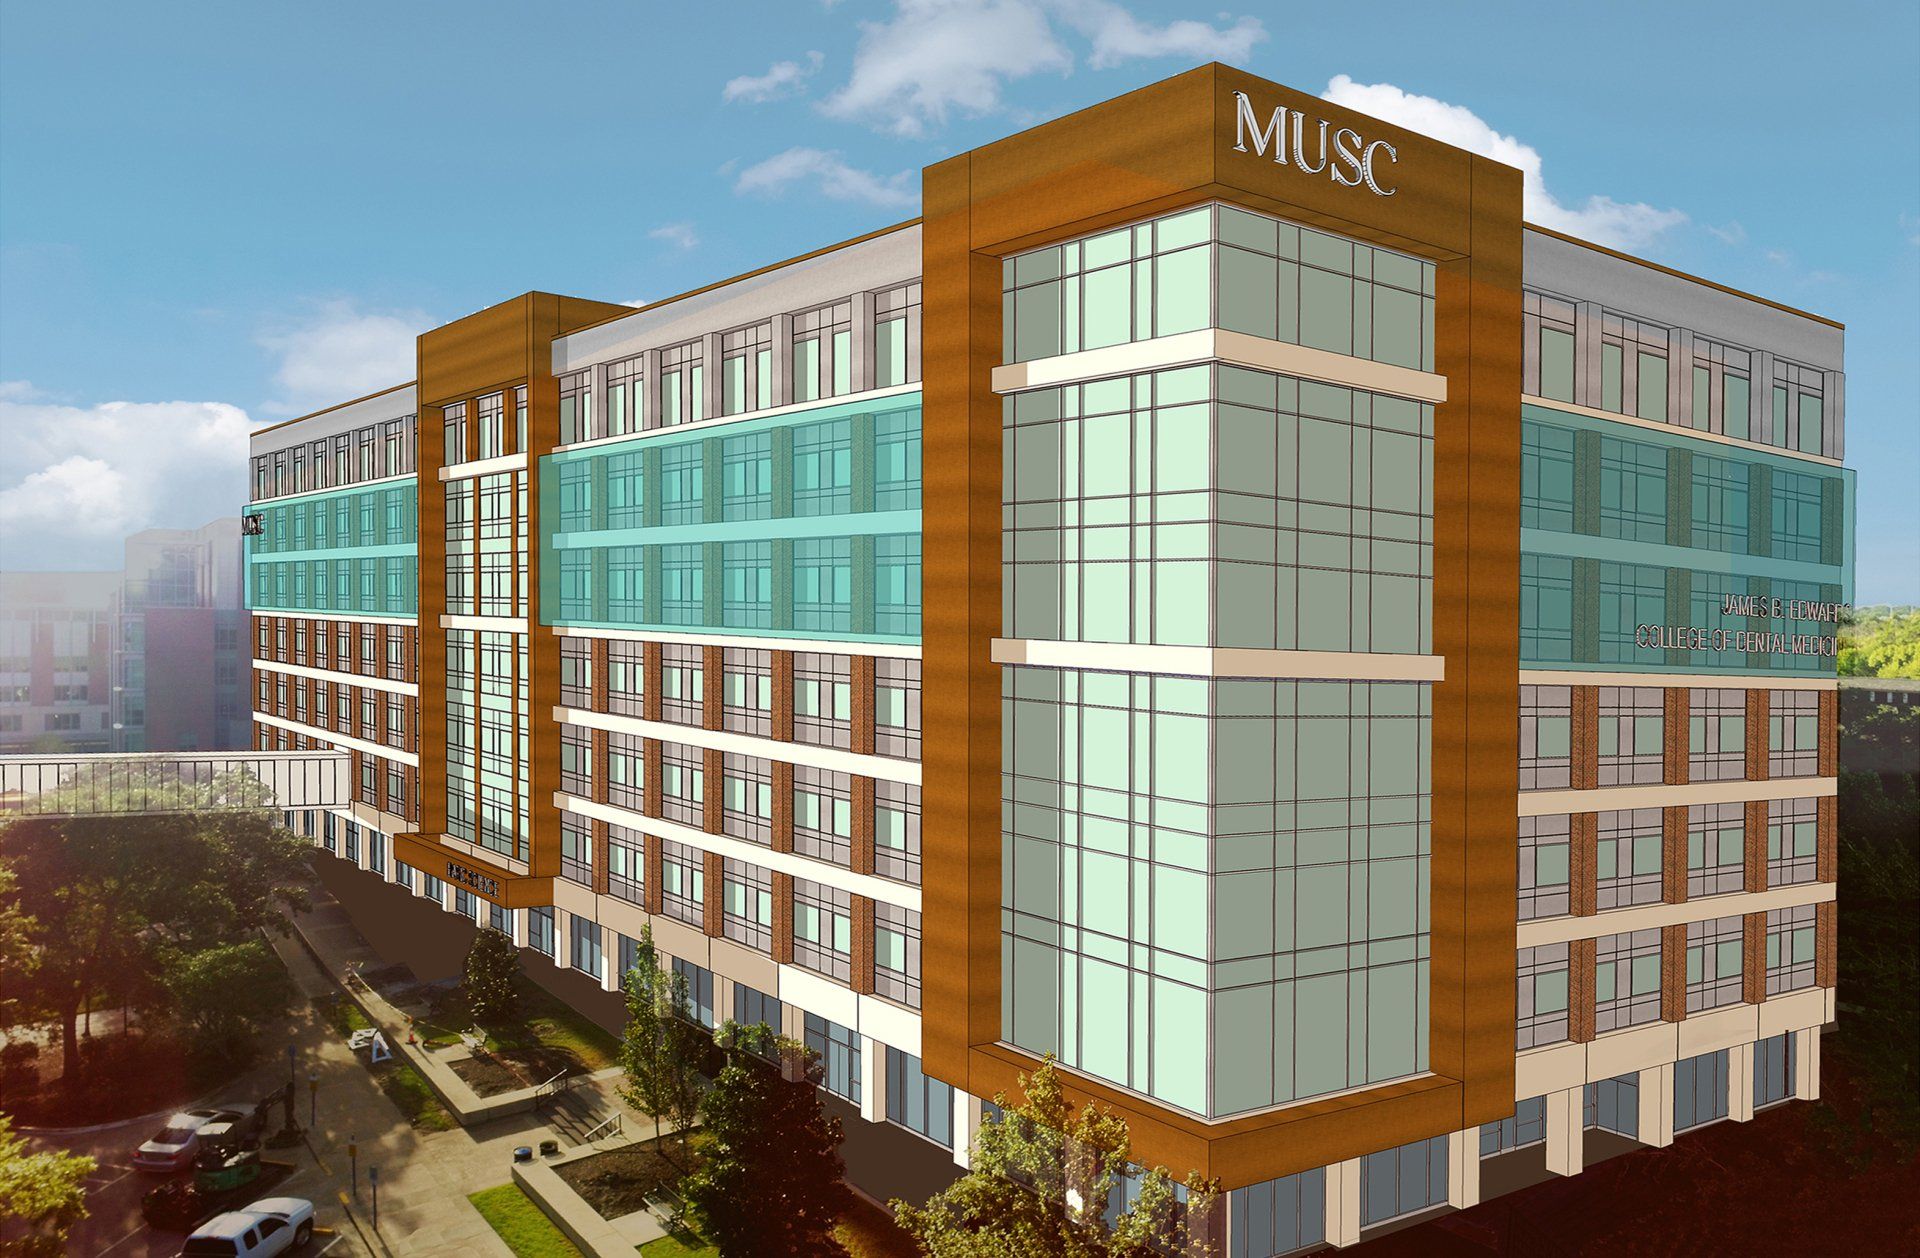 an artist 's impression of the muse building